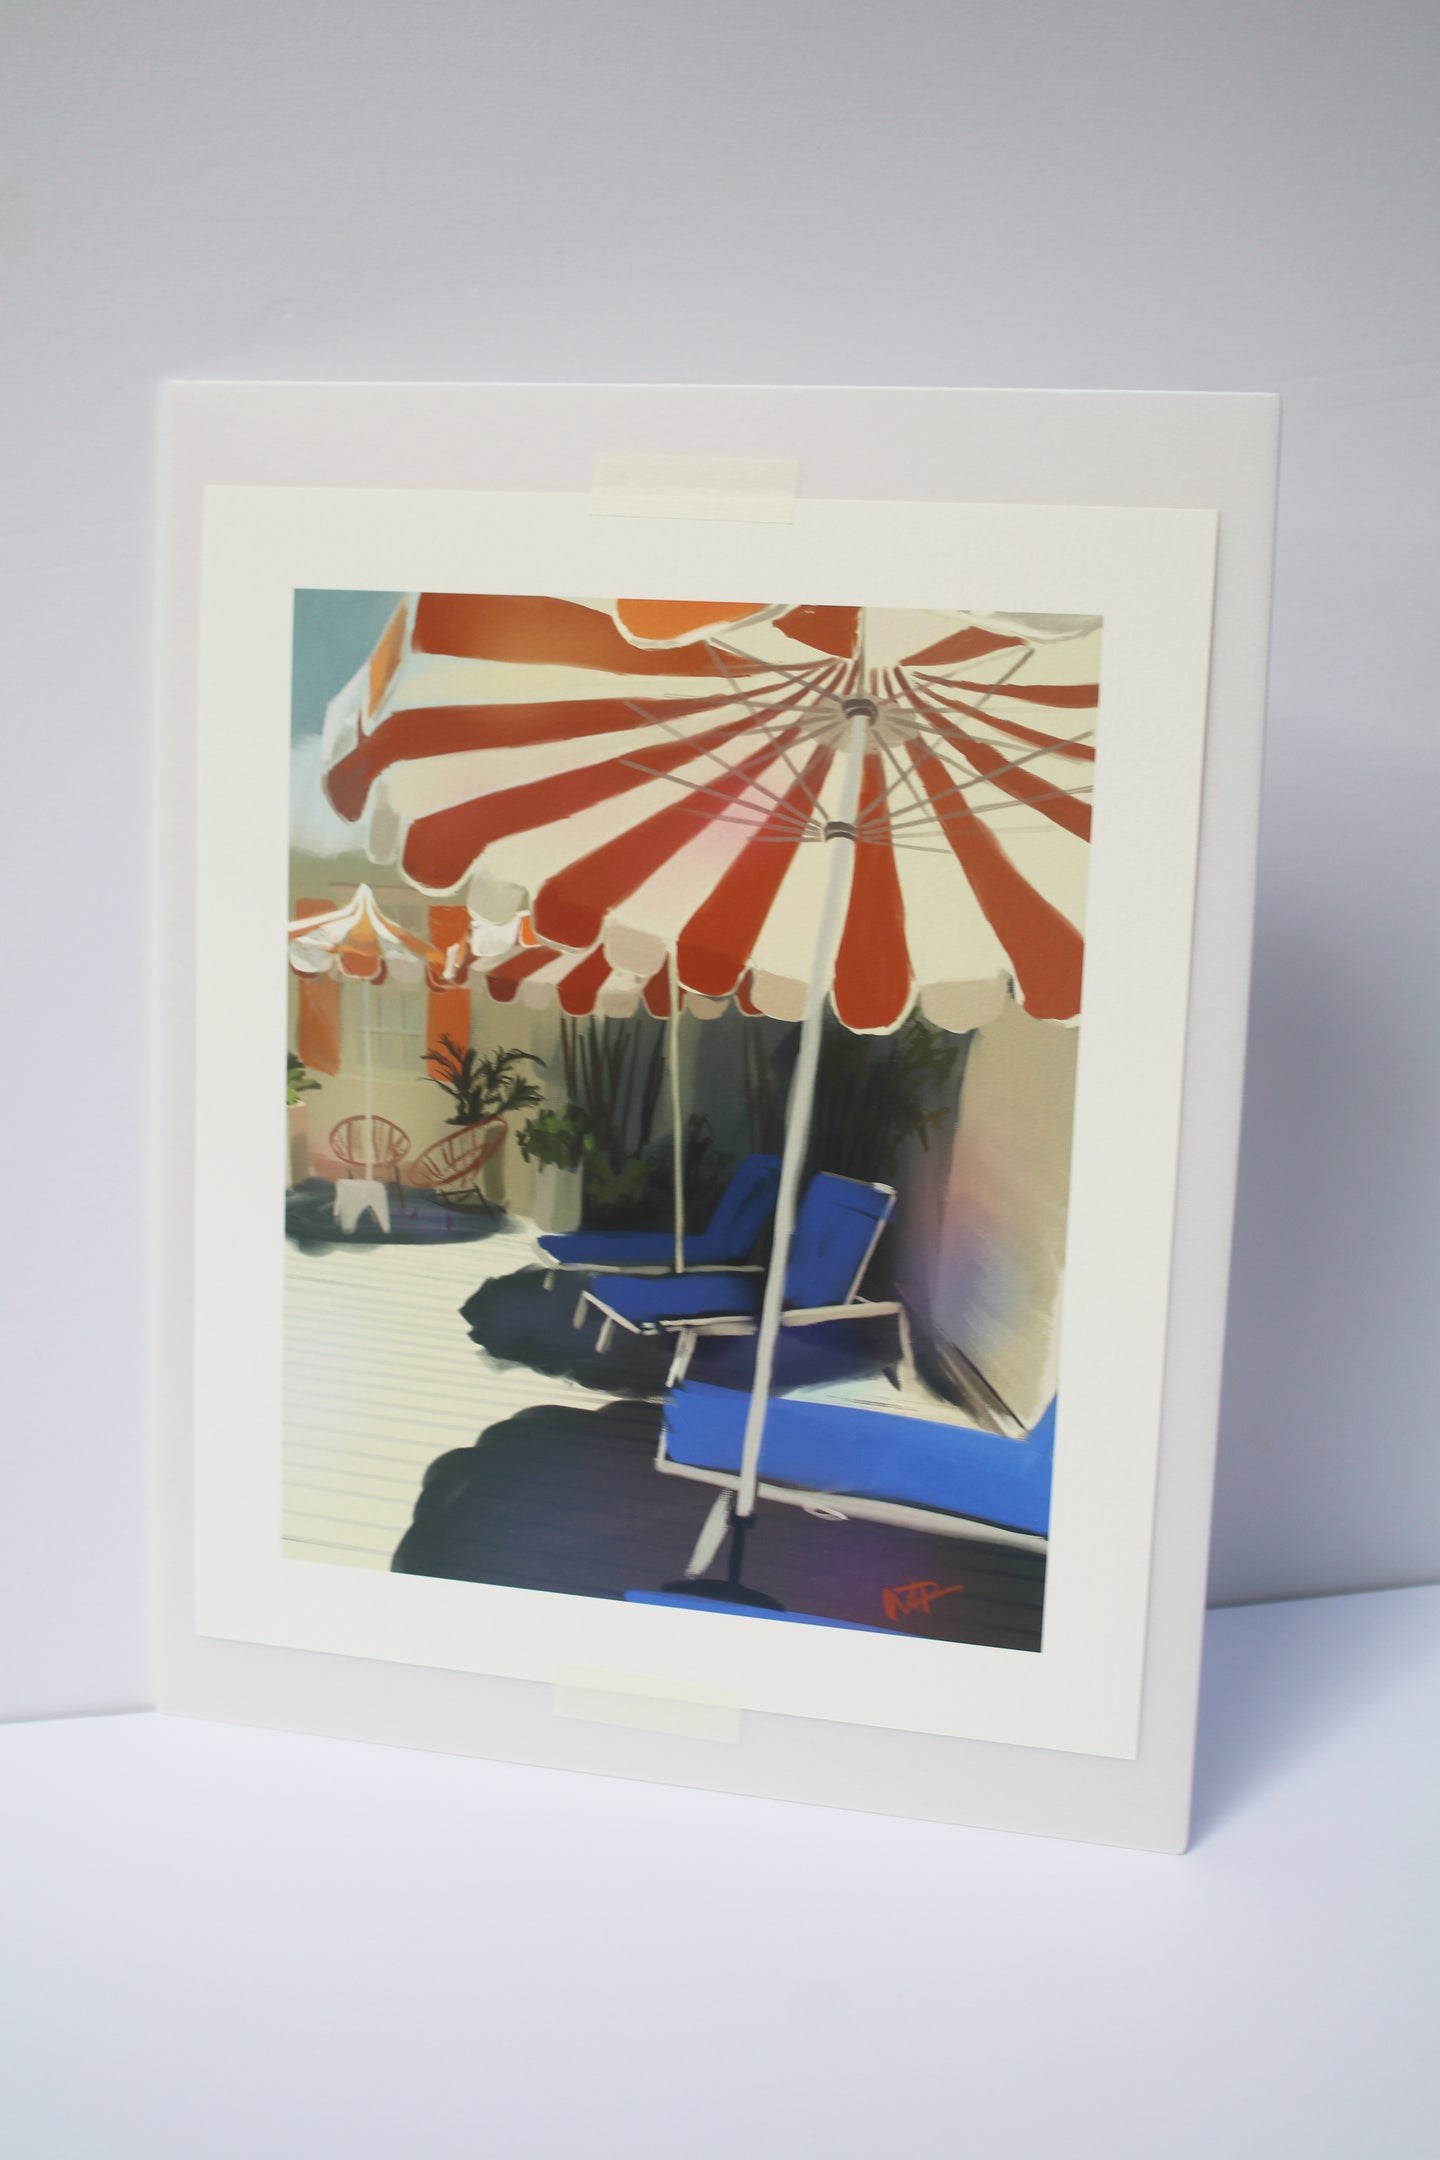 a fine art print of a painting of blue lawn chairs under an orange and cream stripped umbrella by Bone Island Art